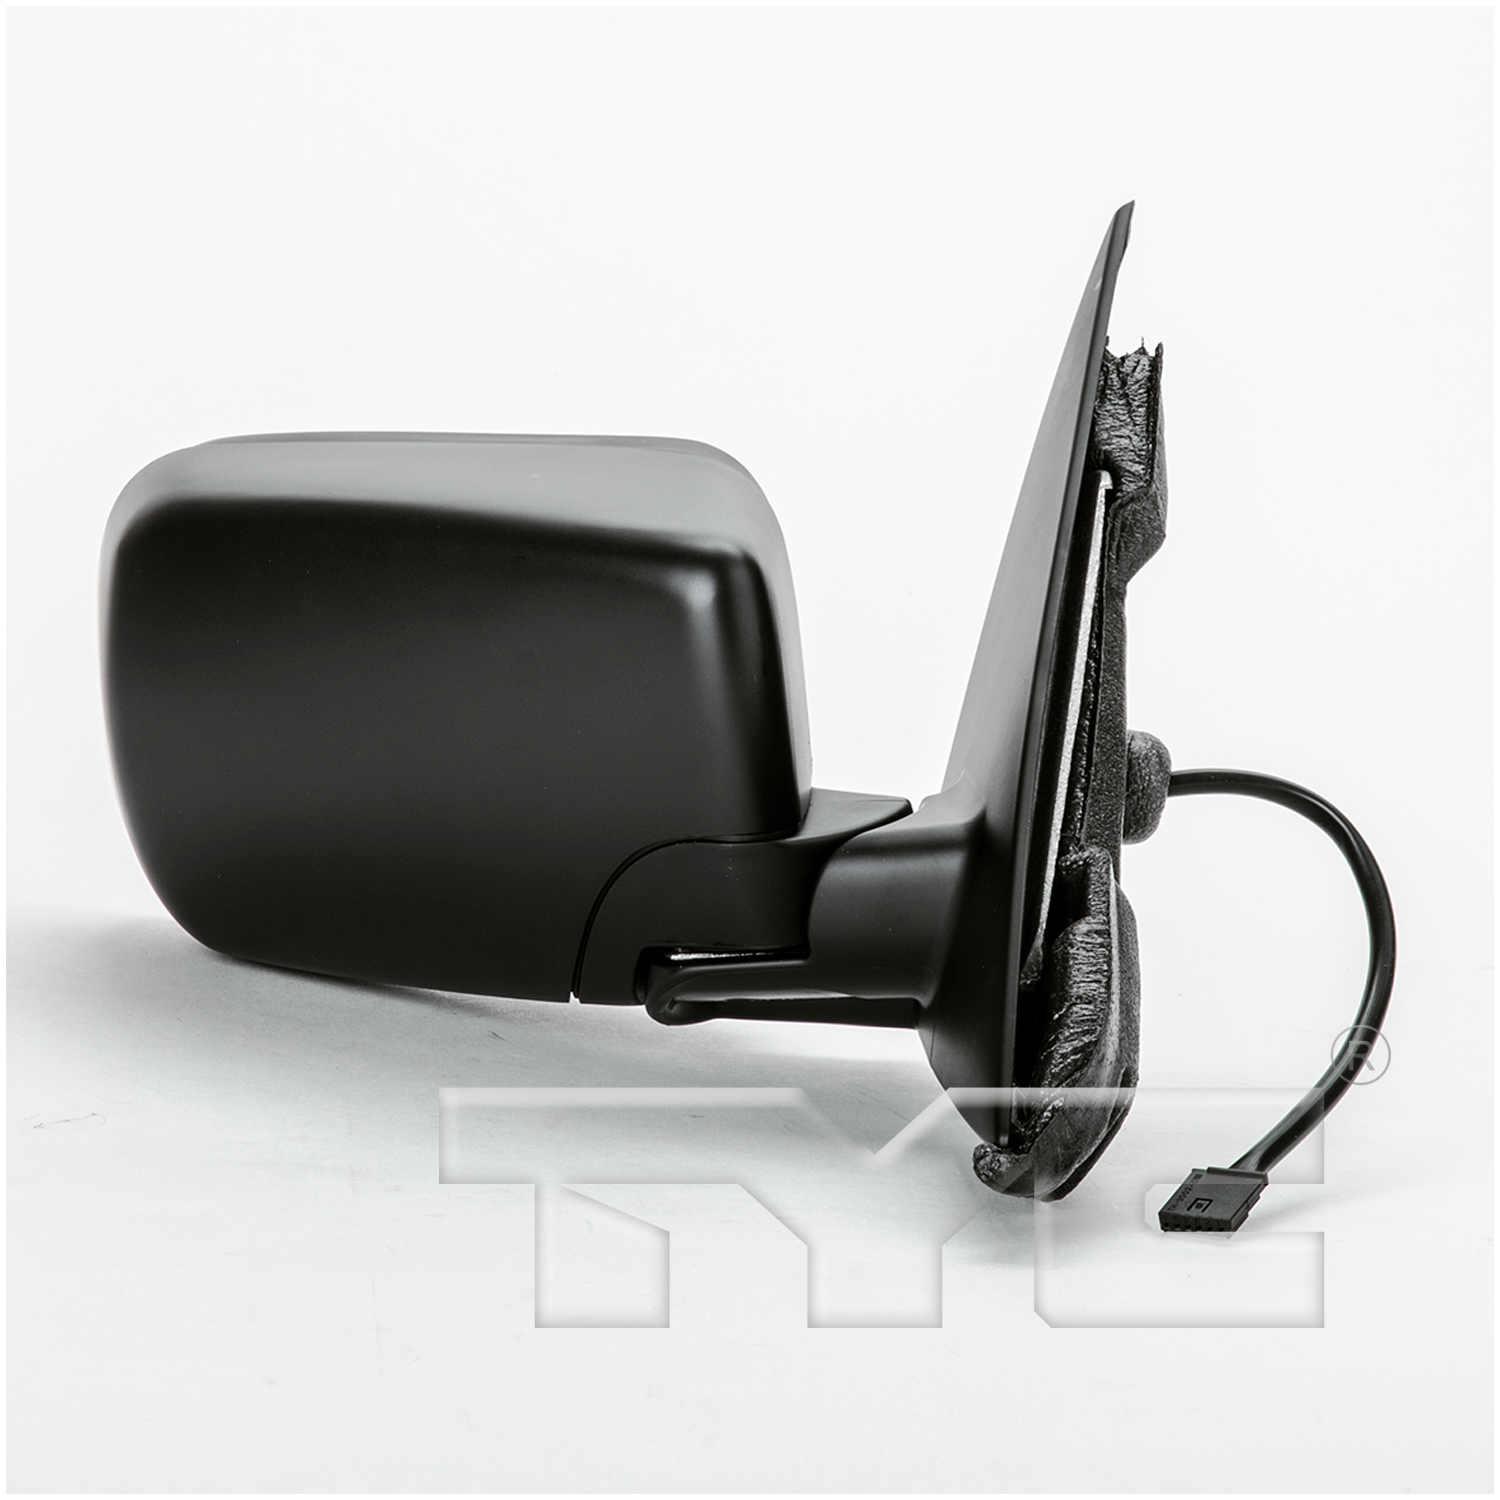 Aftermarket MIRRORS for BMW - 328I, 328i,99-06,RT Mirror outside rear view